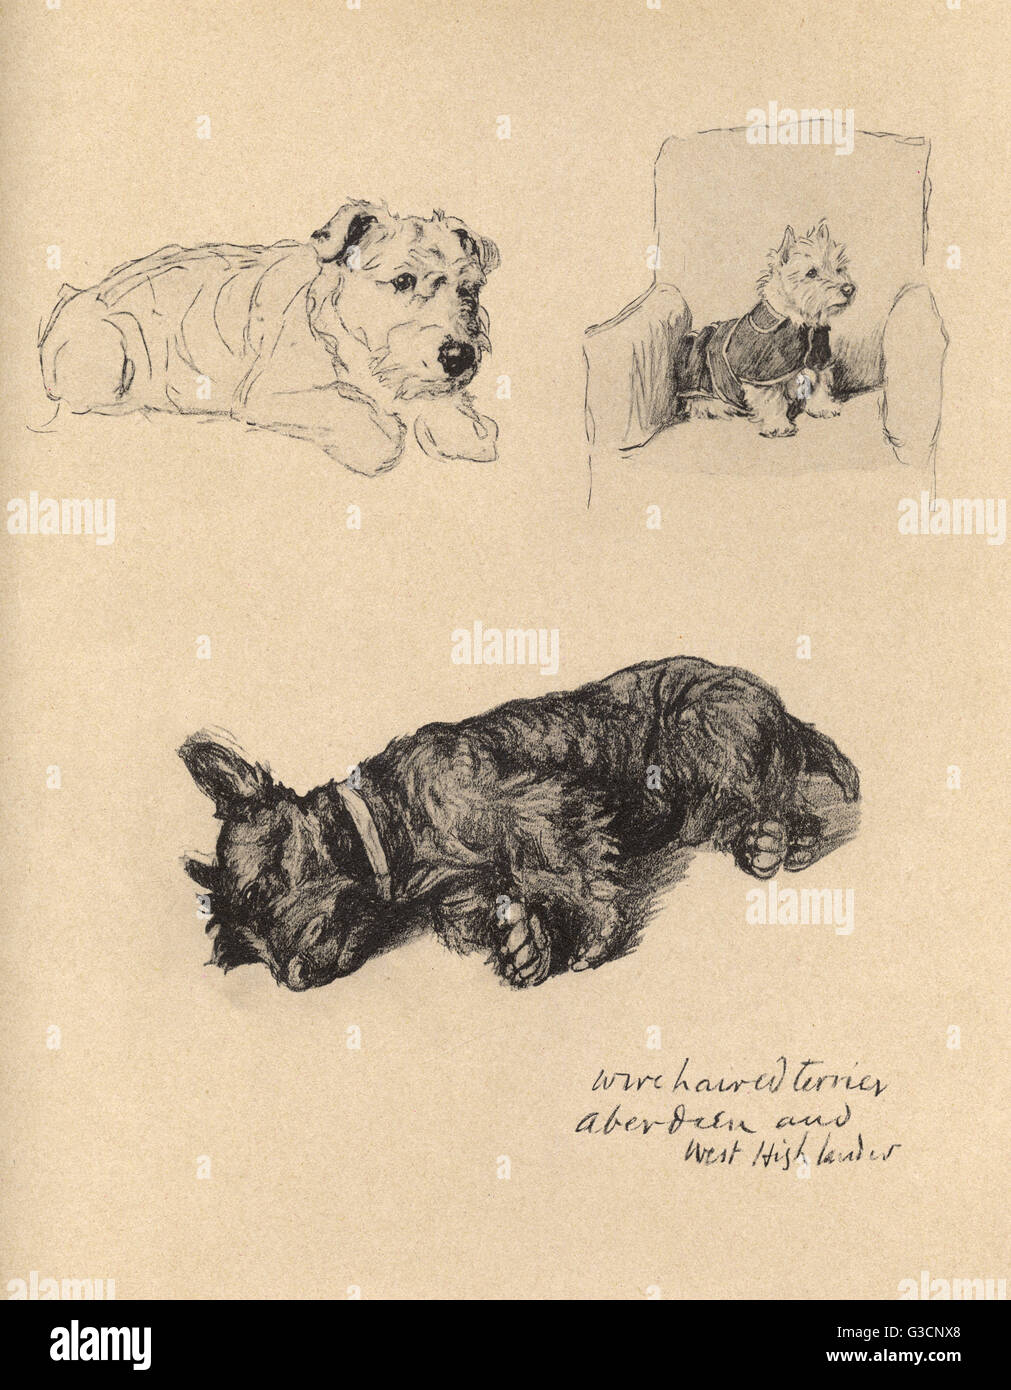 Sketches by Cecil Aldin, Just Among Friends, taken from the artist's sketchbooks. Wire-haired terrier, Aberdeen terrier and West Highland terrier.      Date: 1934 Stock Photo